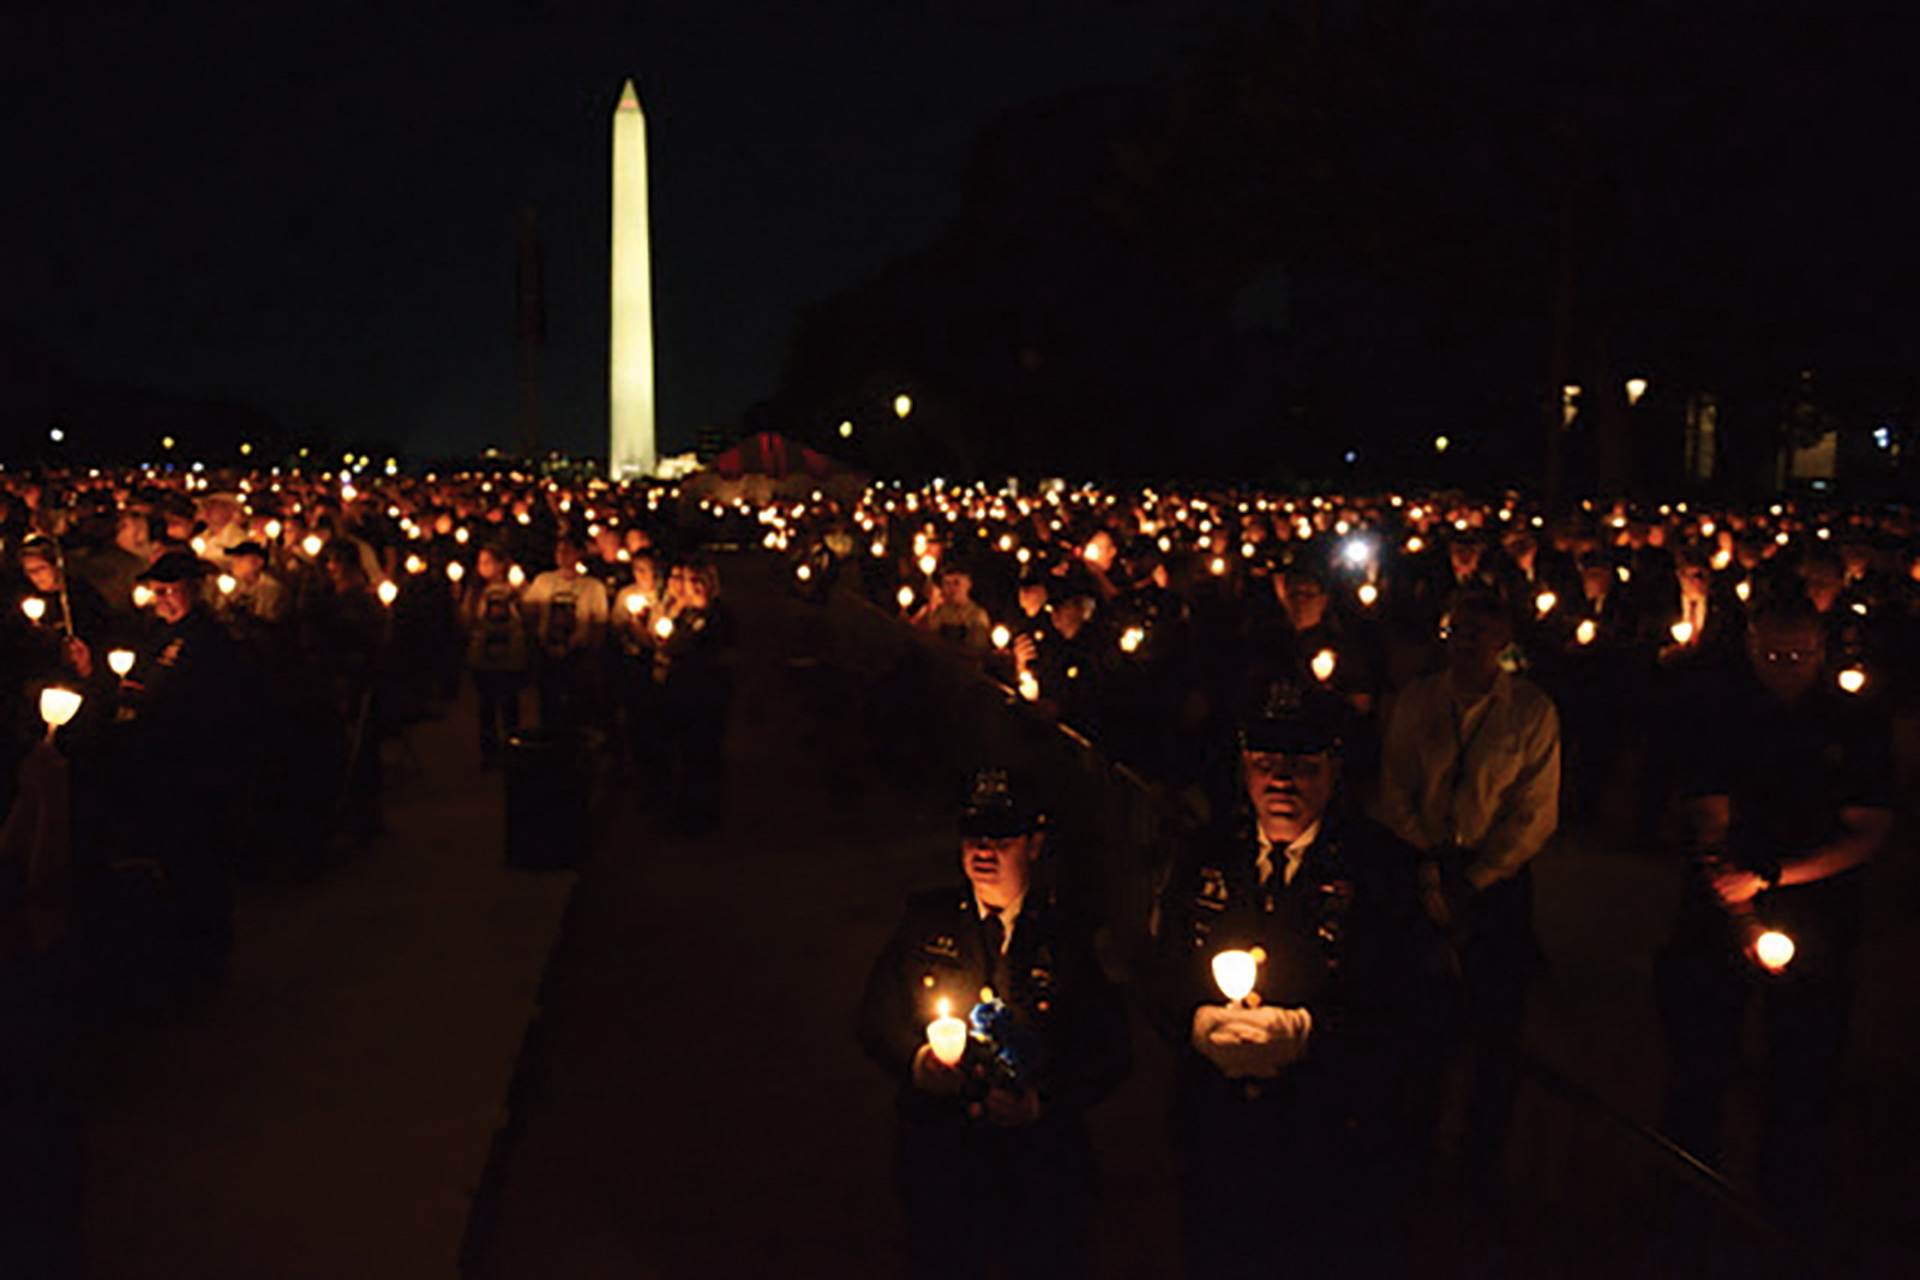 national-police-week-2021-7-thousands-of-candles-lit-up-the-national-mall-during-the-vigil